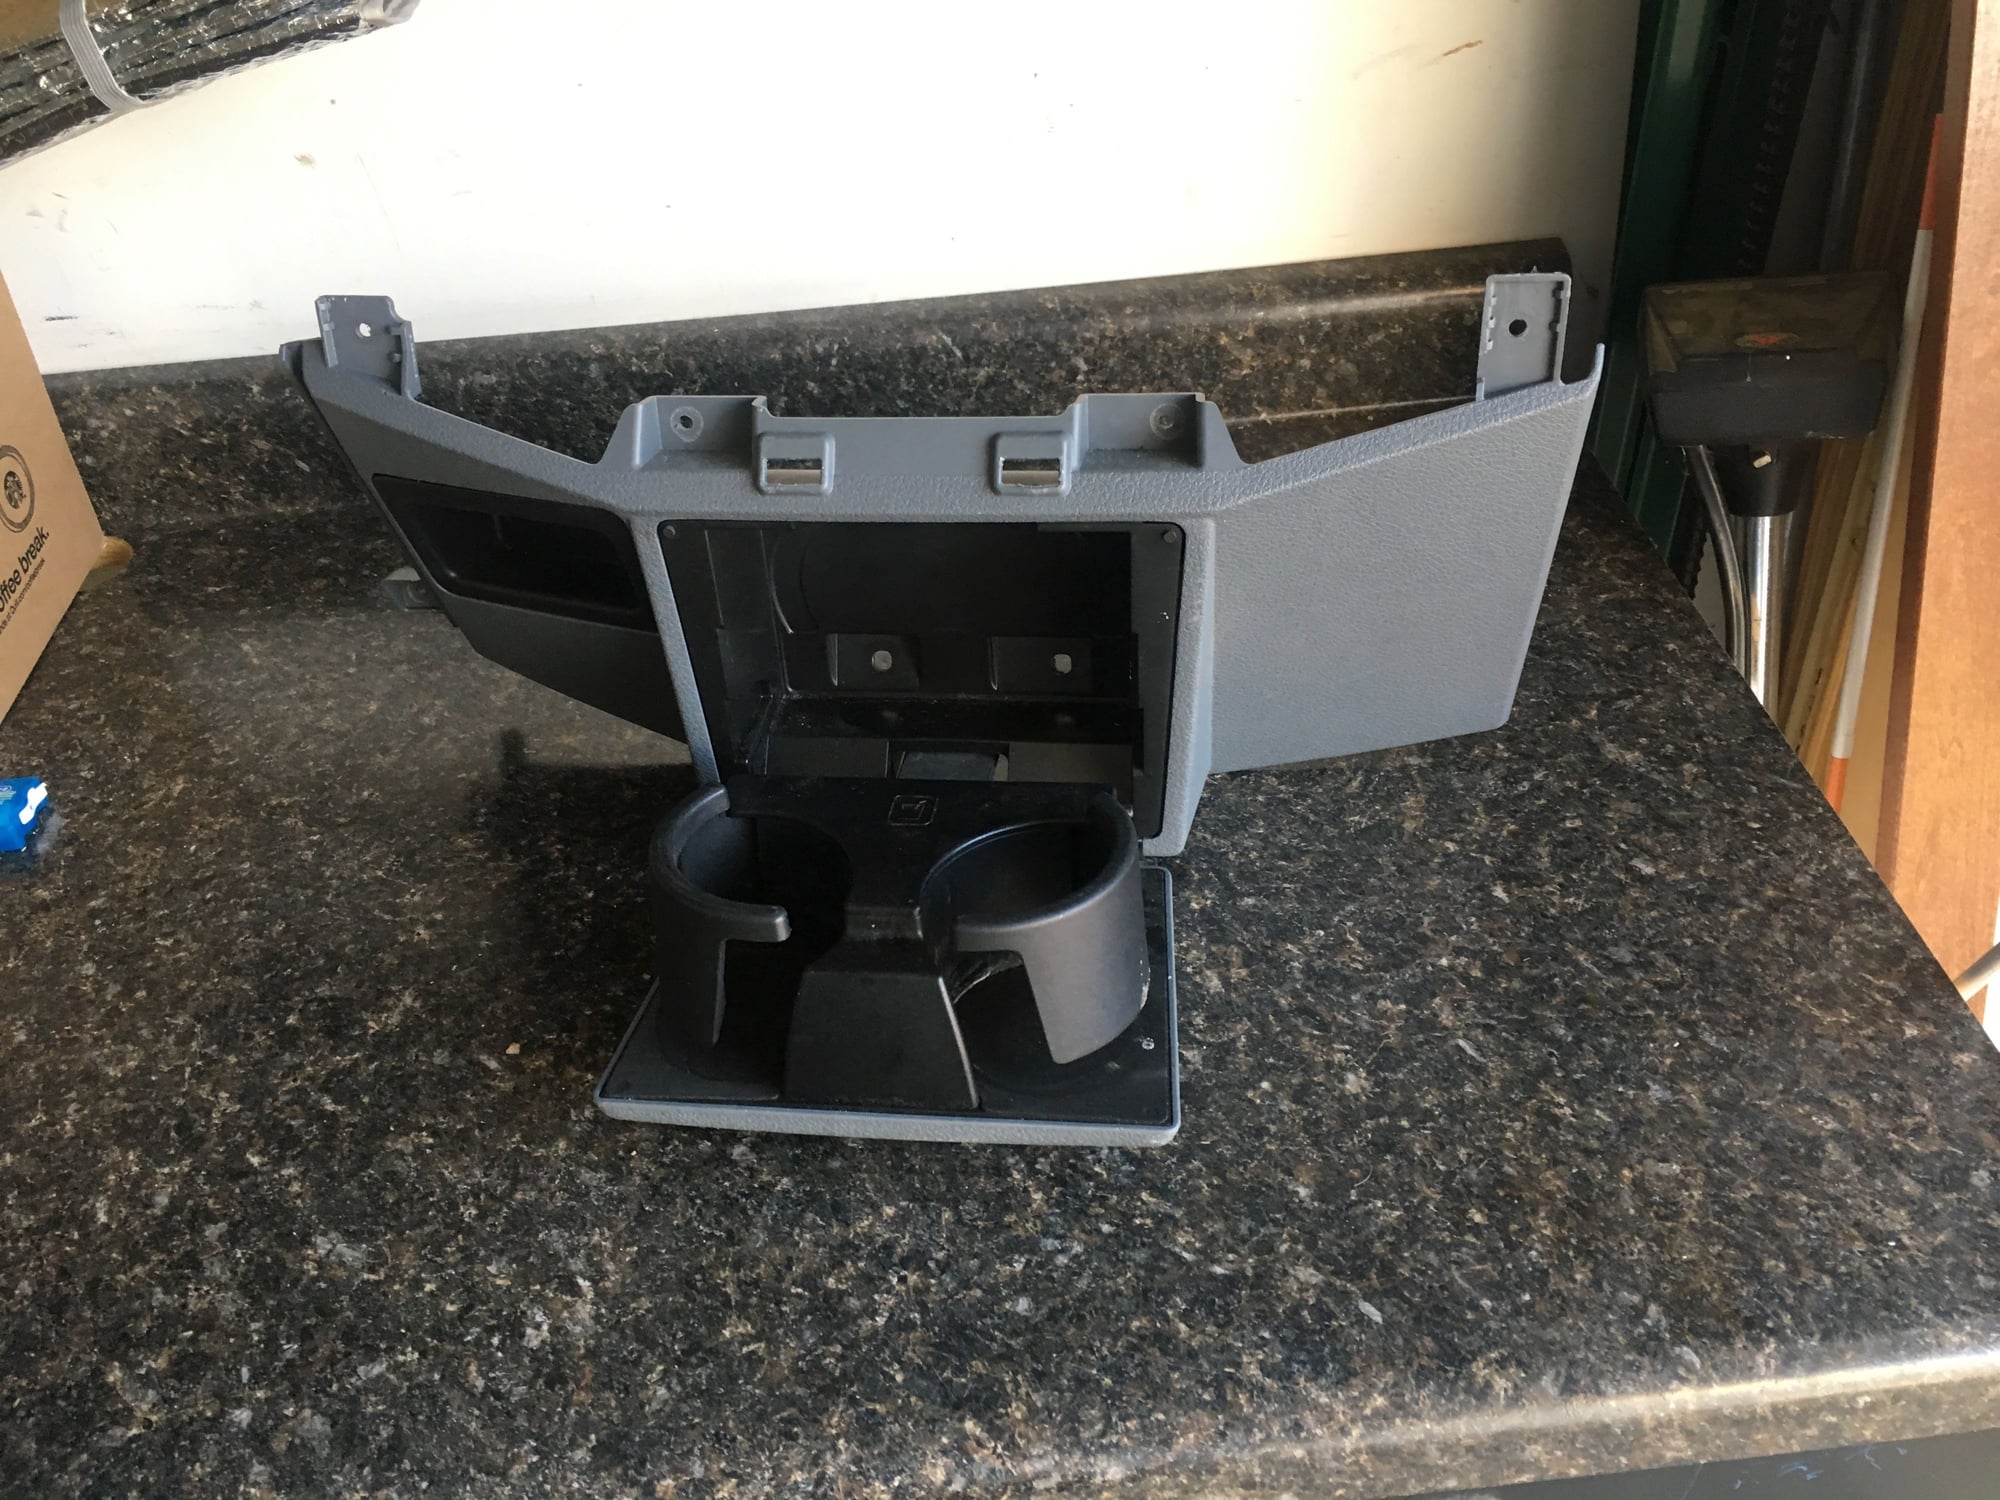 Interior/Upholstery - Super Duty Cup Holders - Used - 2011 to 2016 Ford F-250 Super Duty - 2011 to 2016 Ford F-350 Super Duty - Hampshire, IL 60140, United States